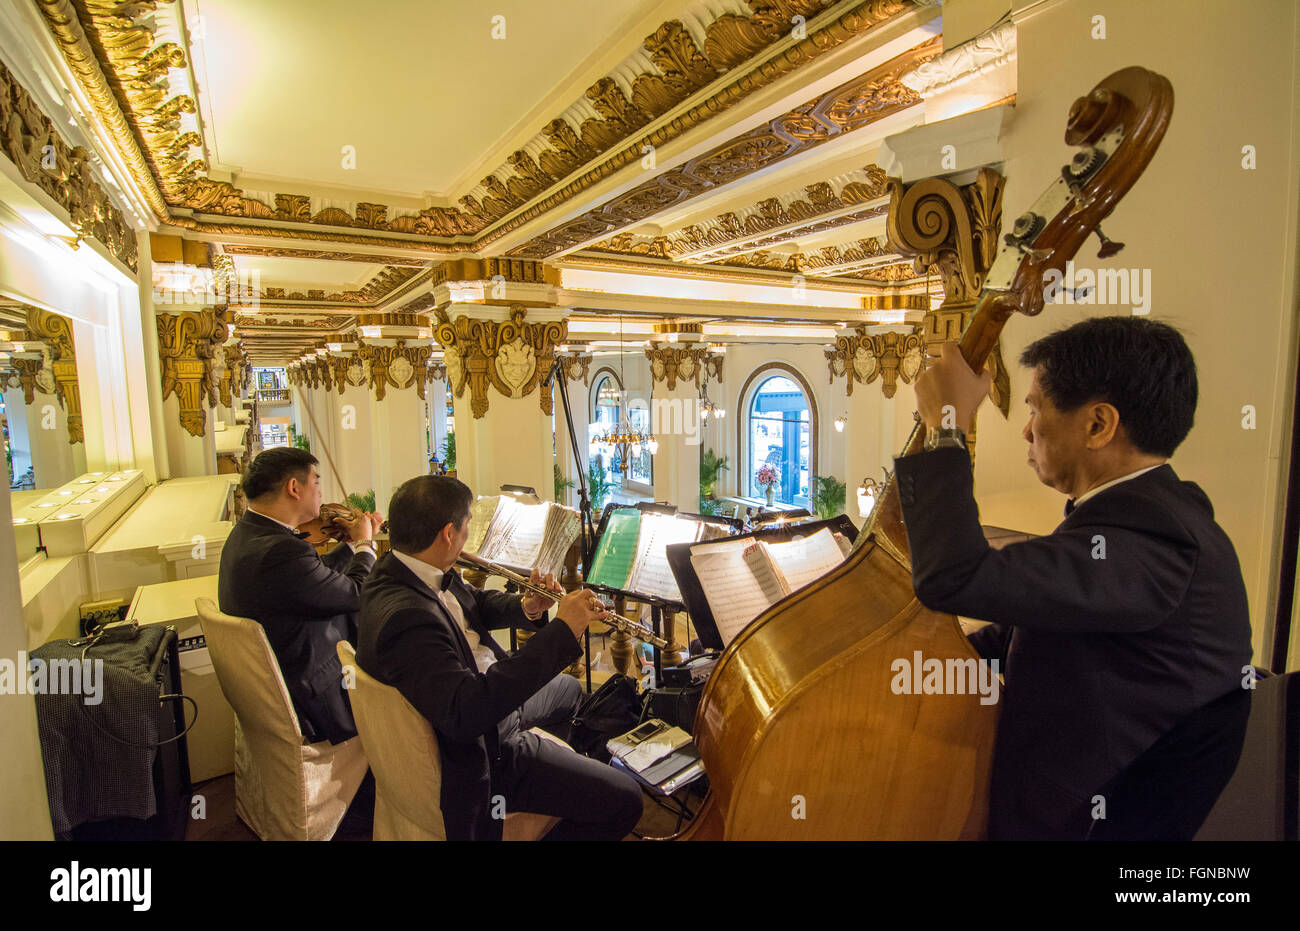 Hong Kong China  Peninsula Hotel orchester playing at high tea in exclusive hotel from above lobby with music Stock Photo